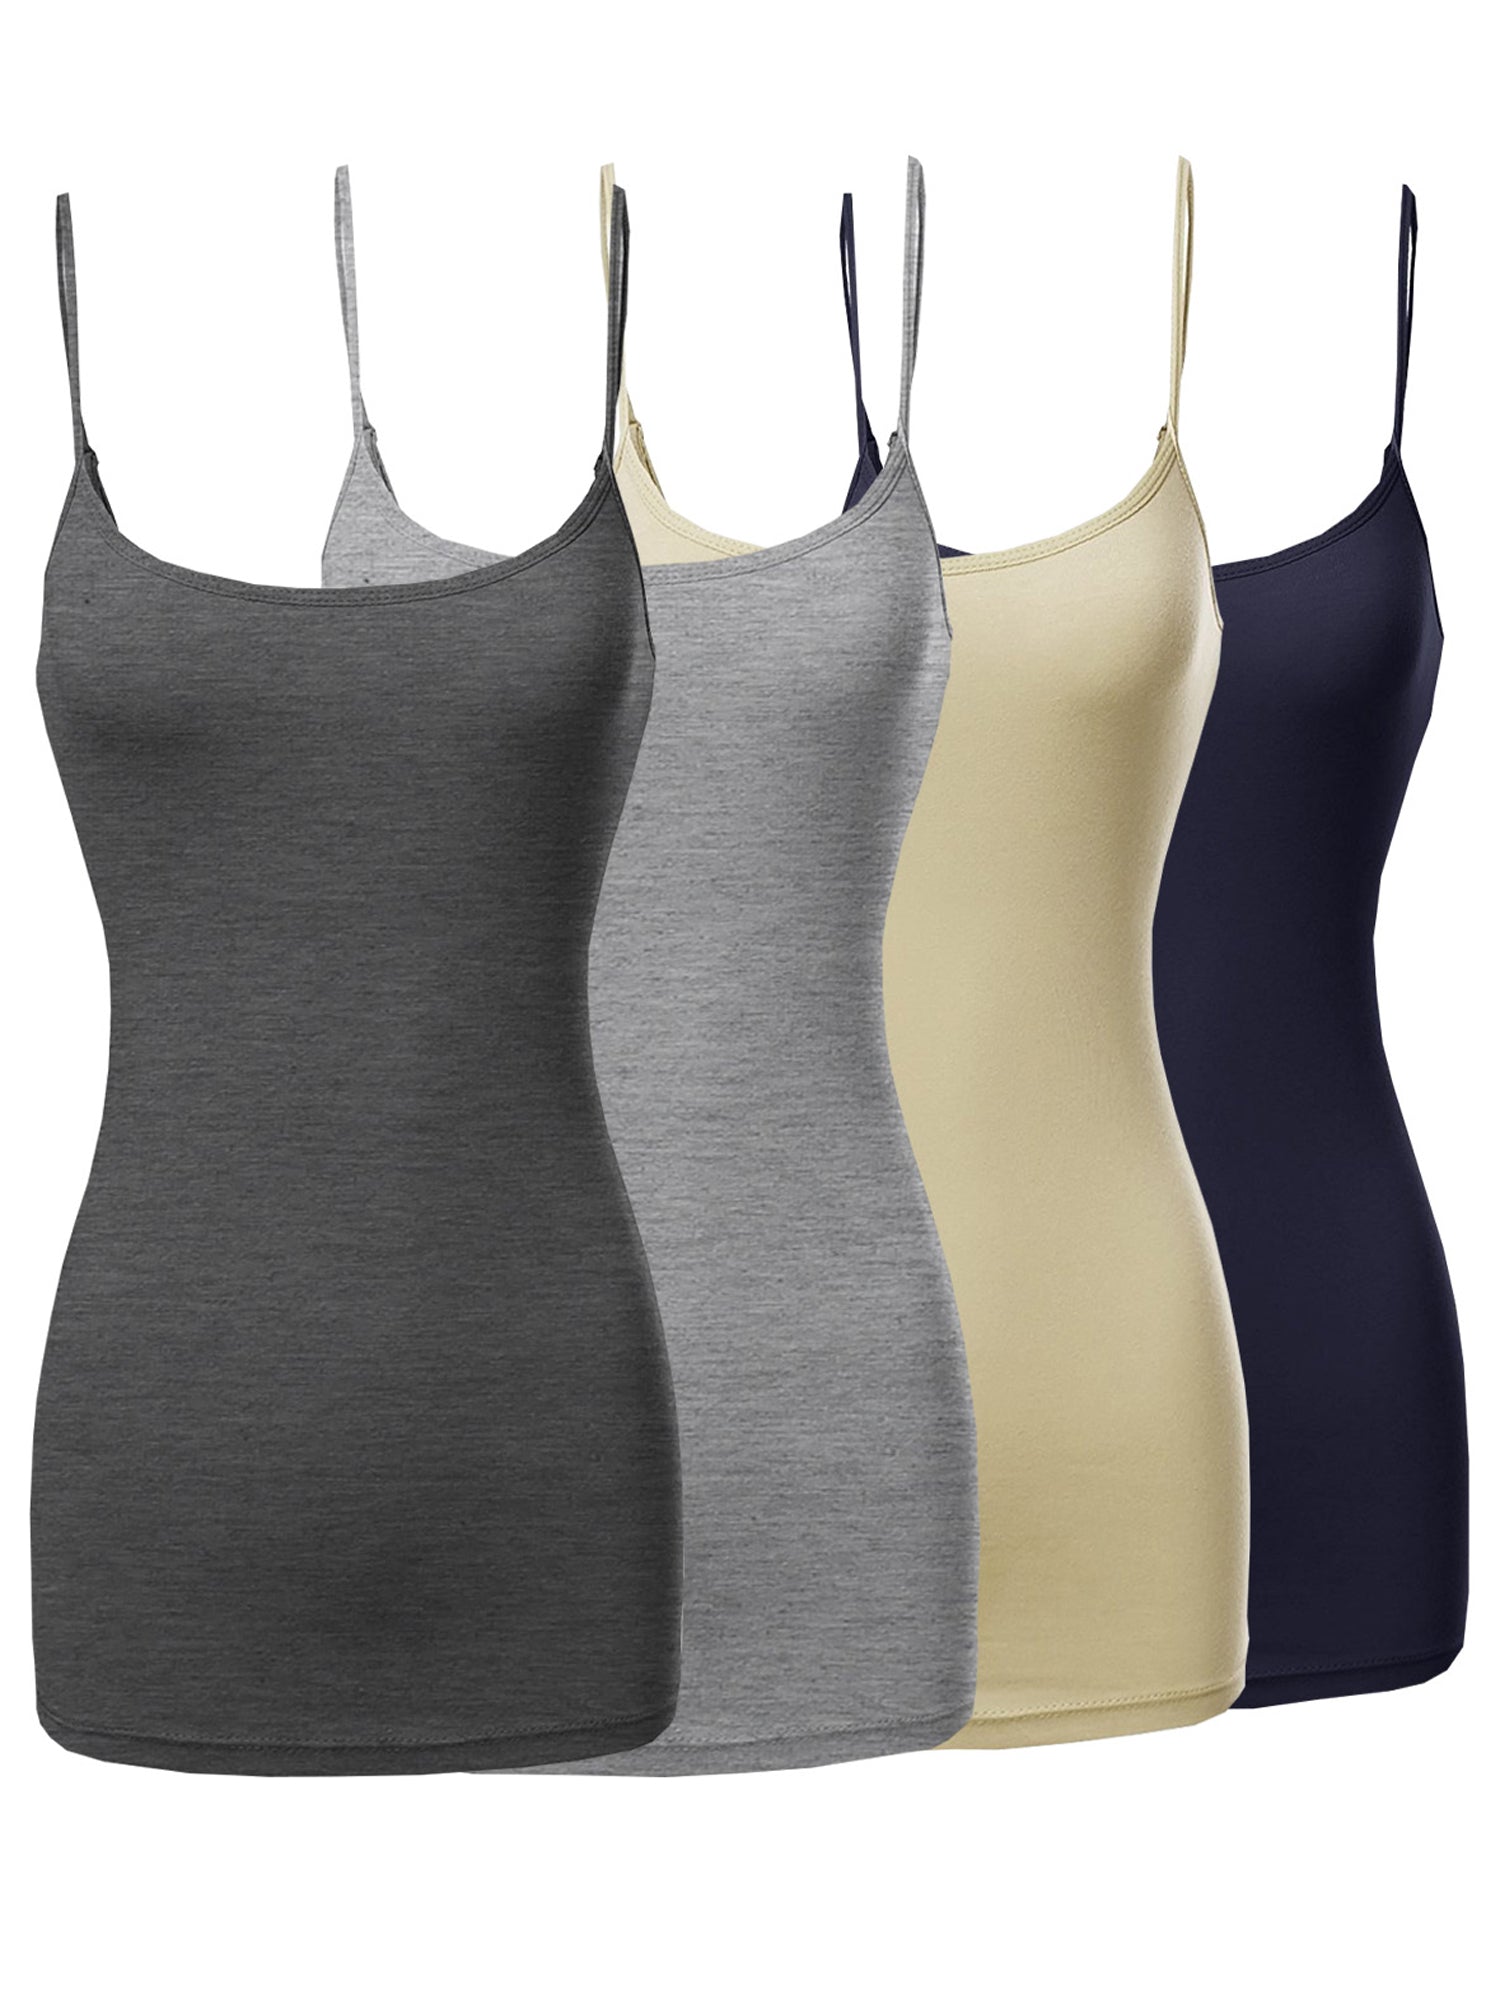 BASIC CAMISOLE WITH ADJUSTABLE SPAGHETTI STRAP TANK TOP (STYLE# 712) -  Natural Uniforms